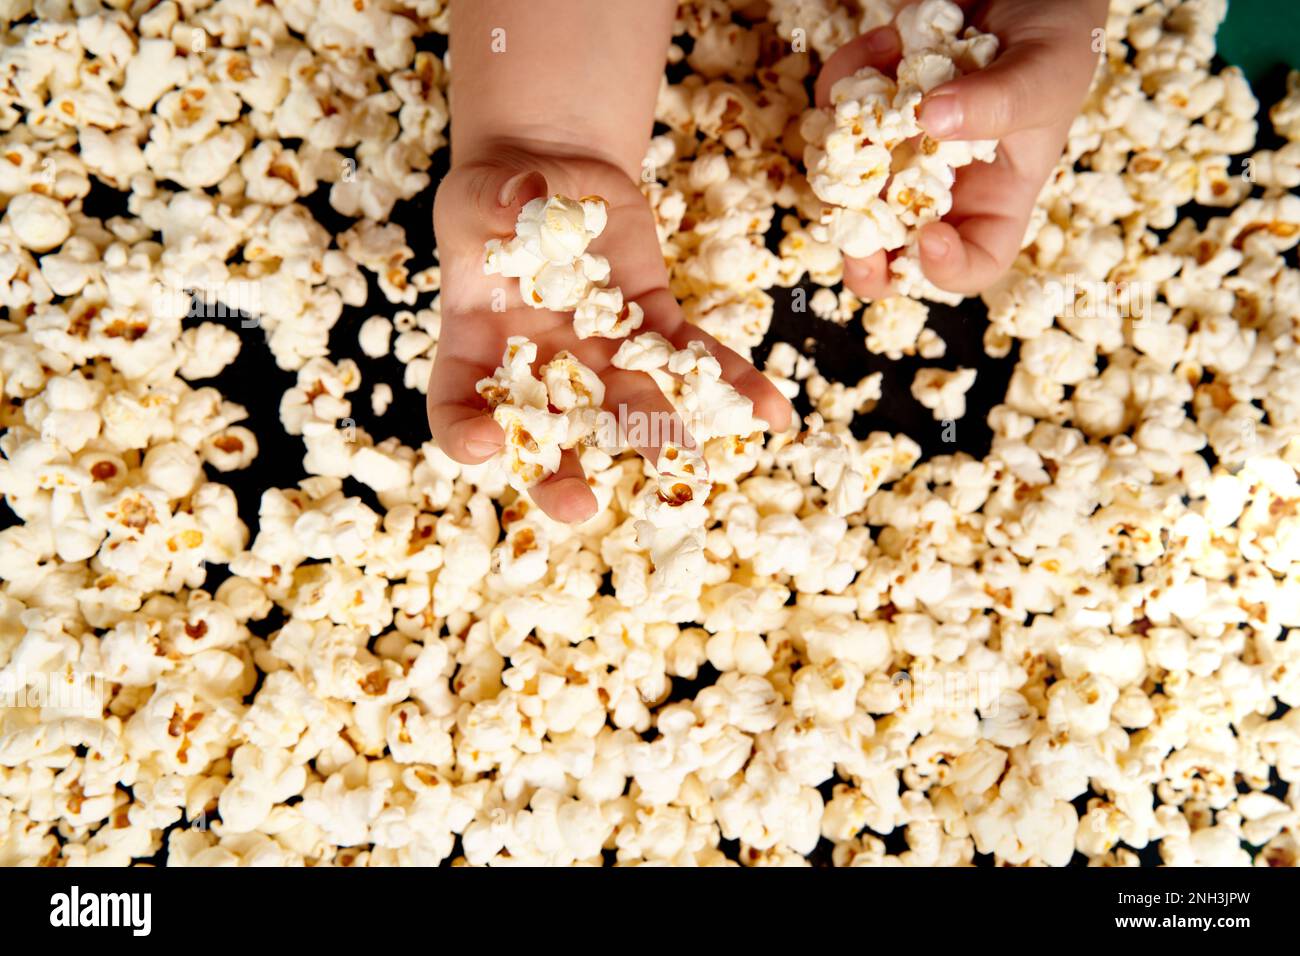 Children's hands are picking up popcorn. Flat lay . The concept of a birthday, party, holiday, home leisure. Copy space for your product. Popcorn texture or background. Stock Photo